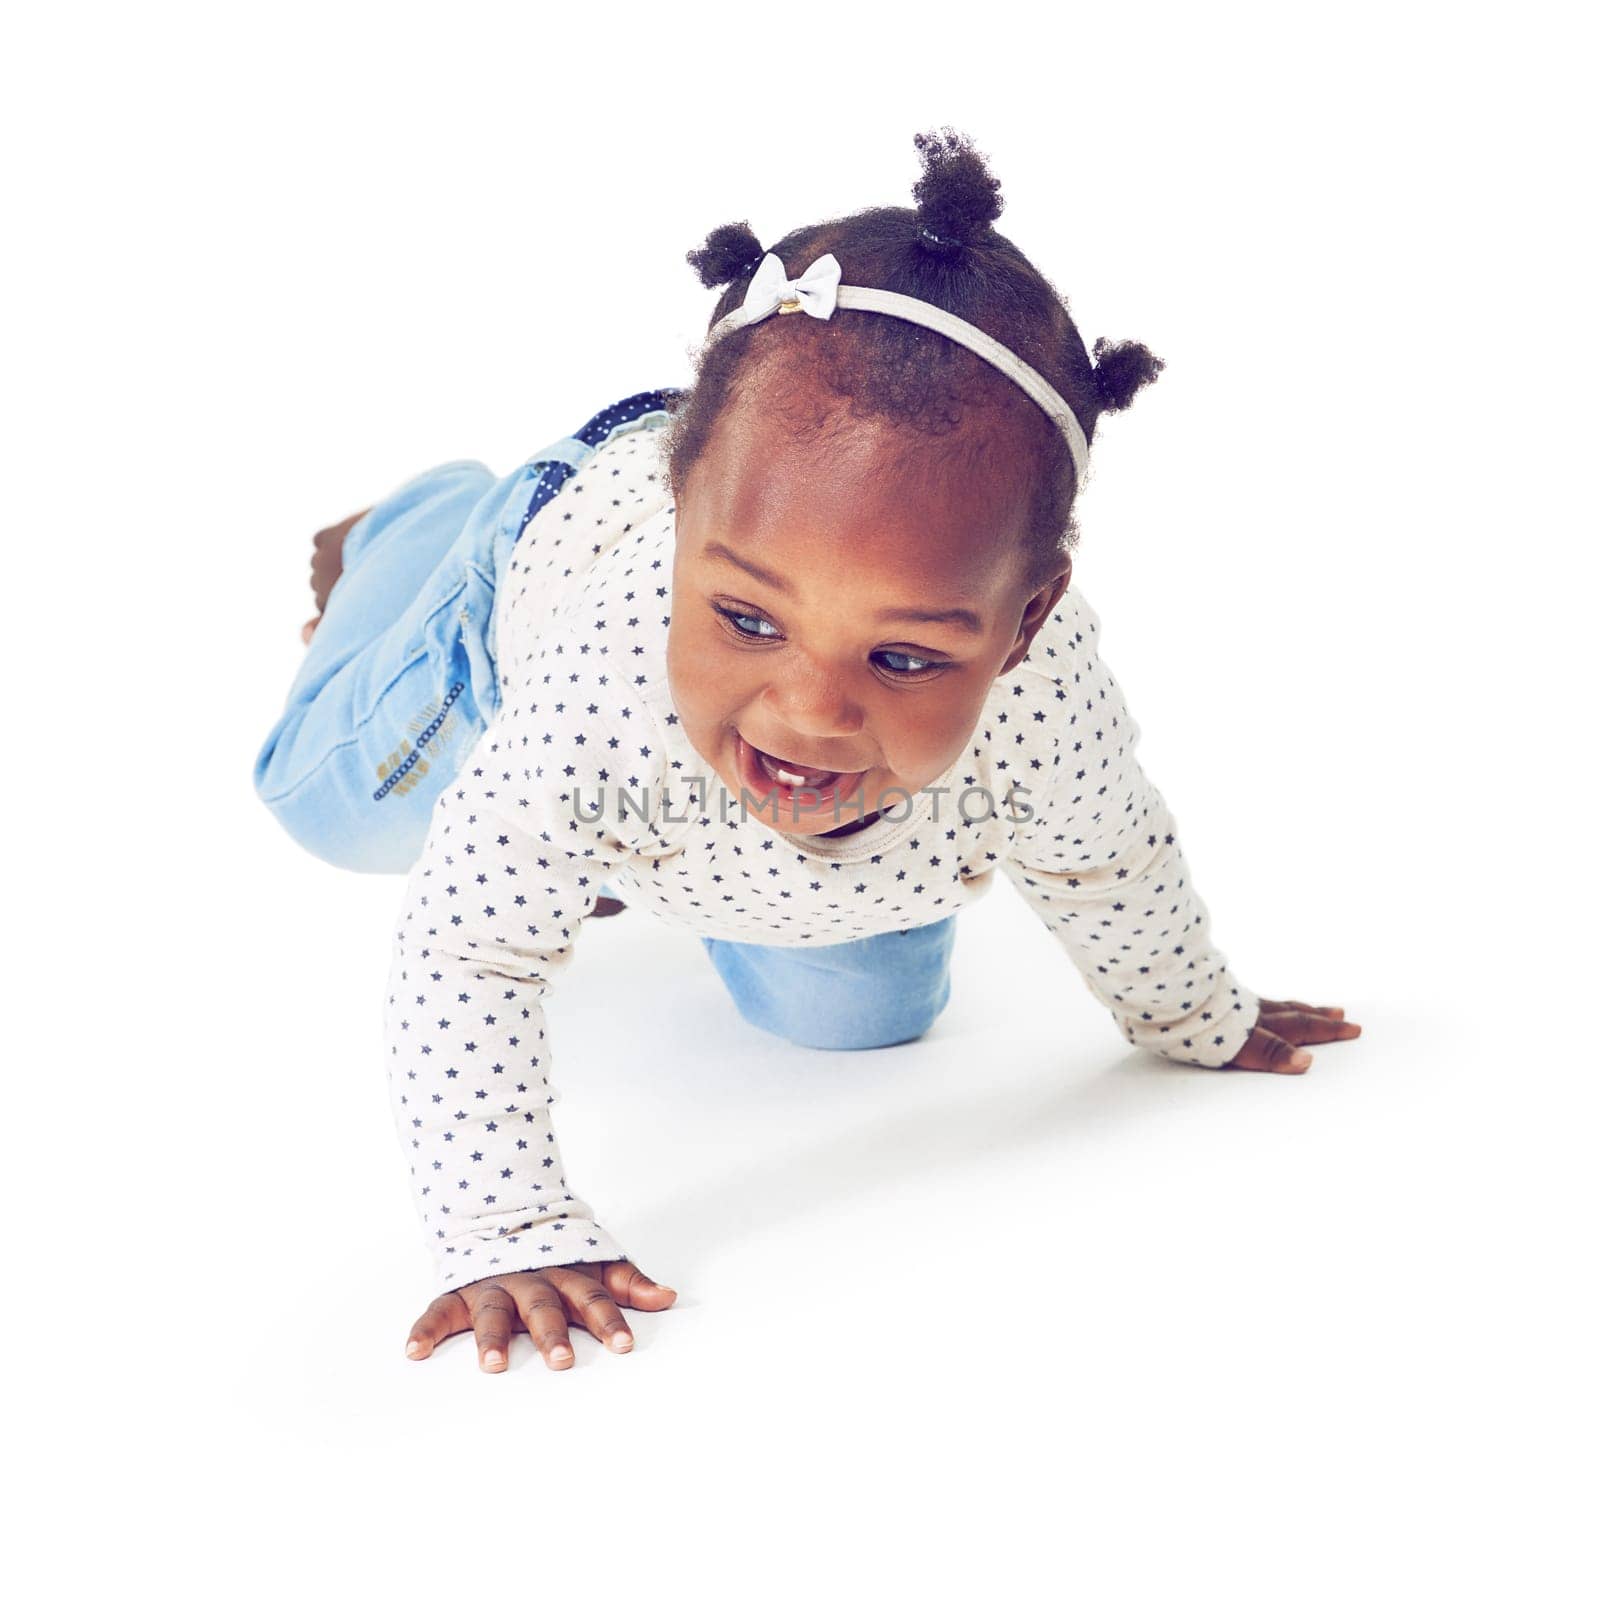 Baby, girl or laugh by crawling, play or thinking of learning, growth on mock up on white background. Black toddler, crawl or step to imagine, explore or motor skill development on mobility milestone.